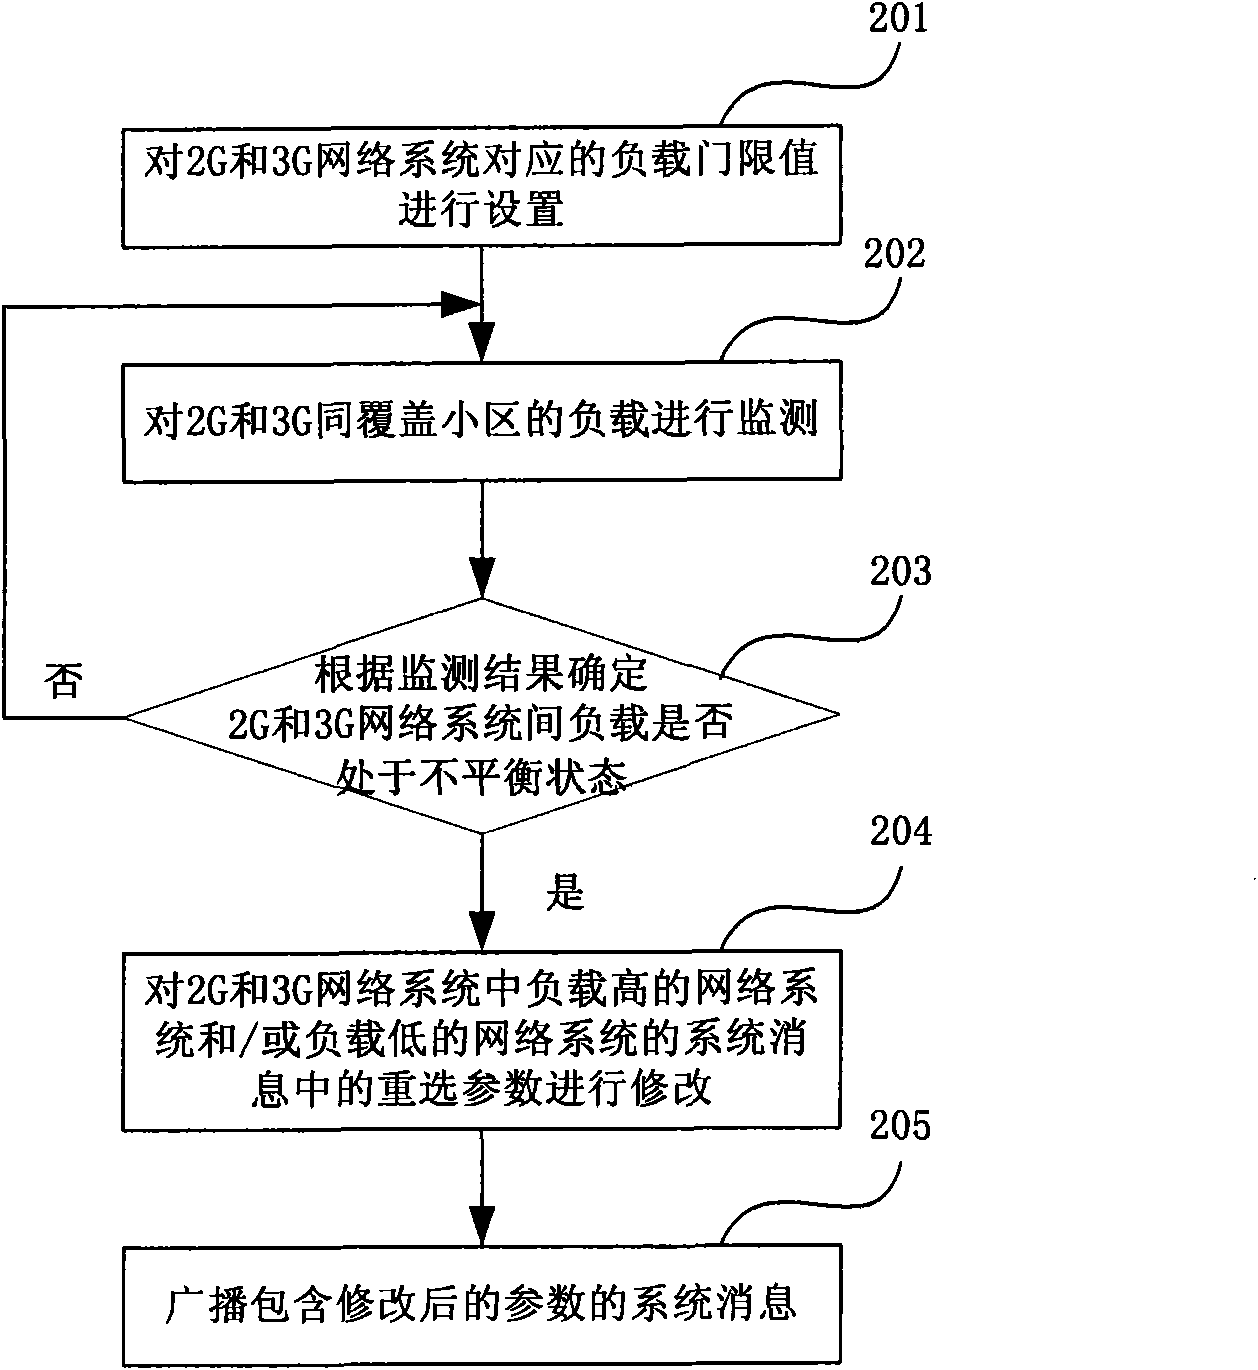 Load control method, apparatus and system